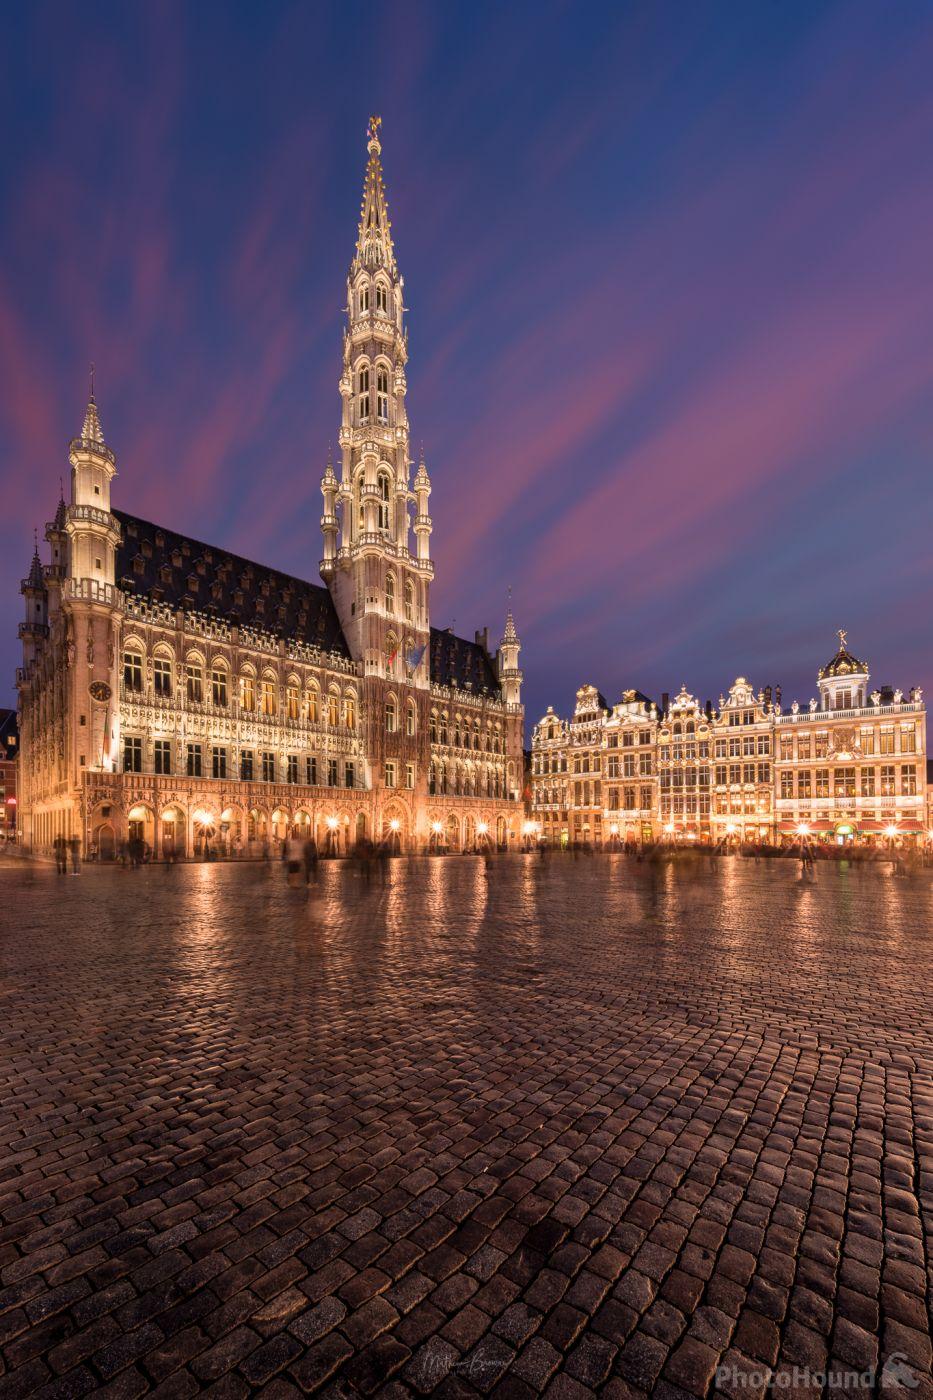 Image of Grand Place by Mathew Browne